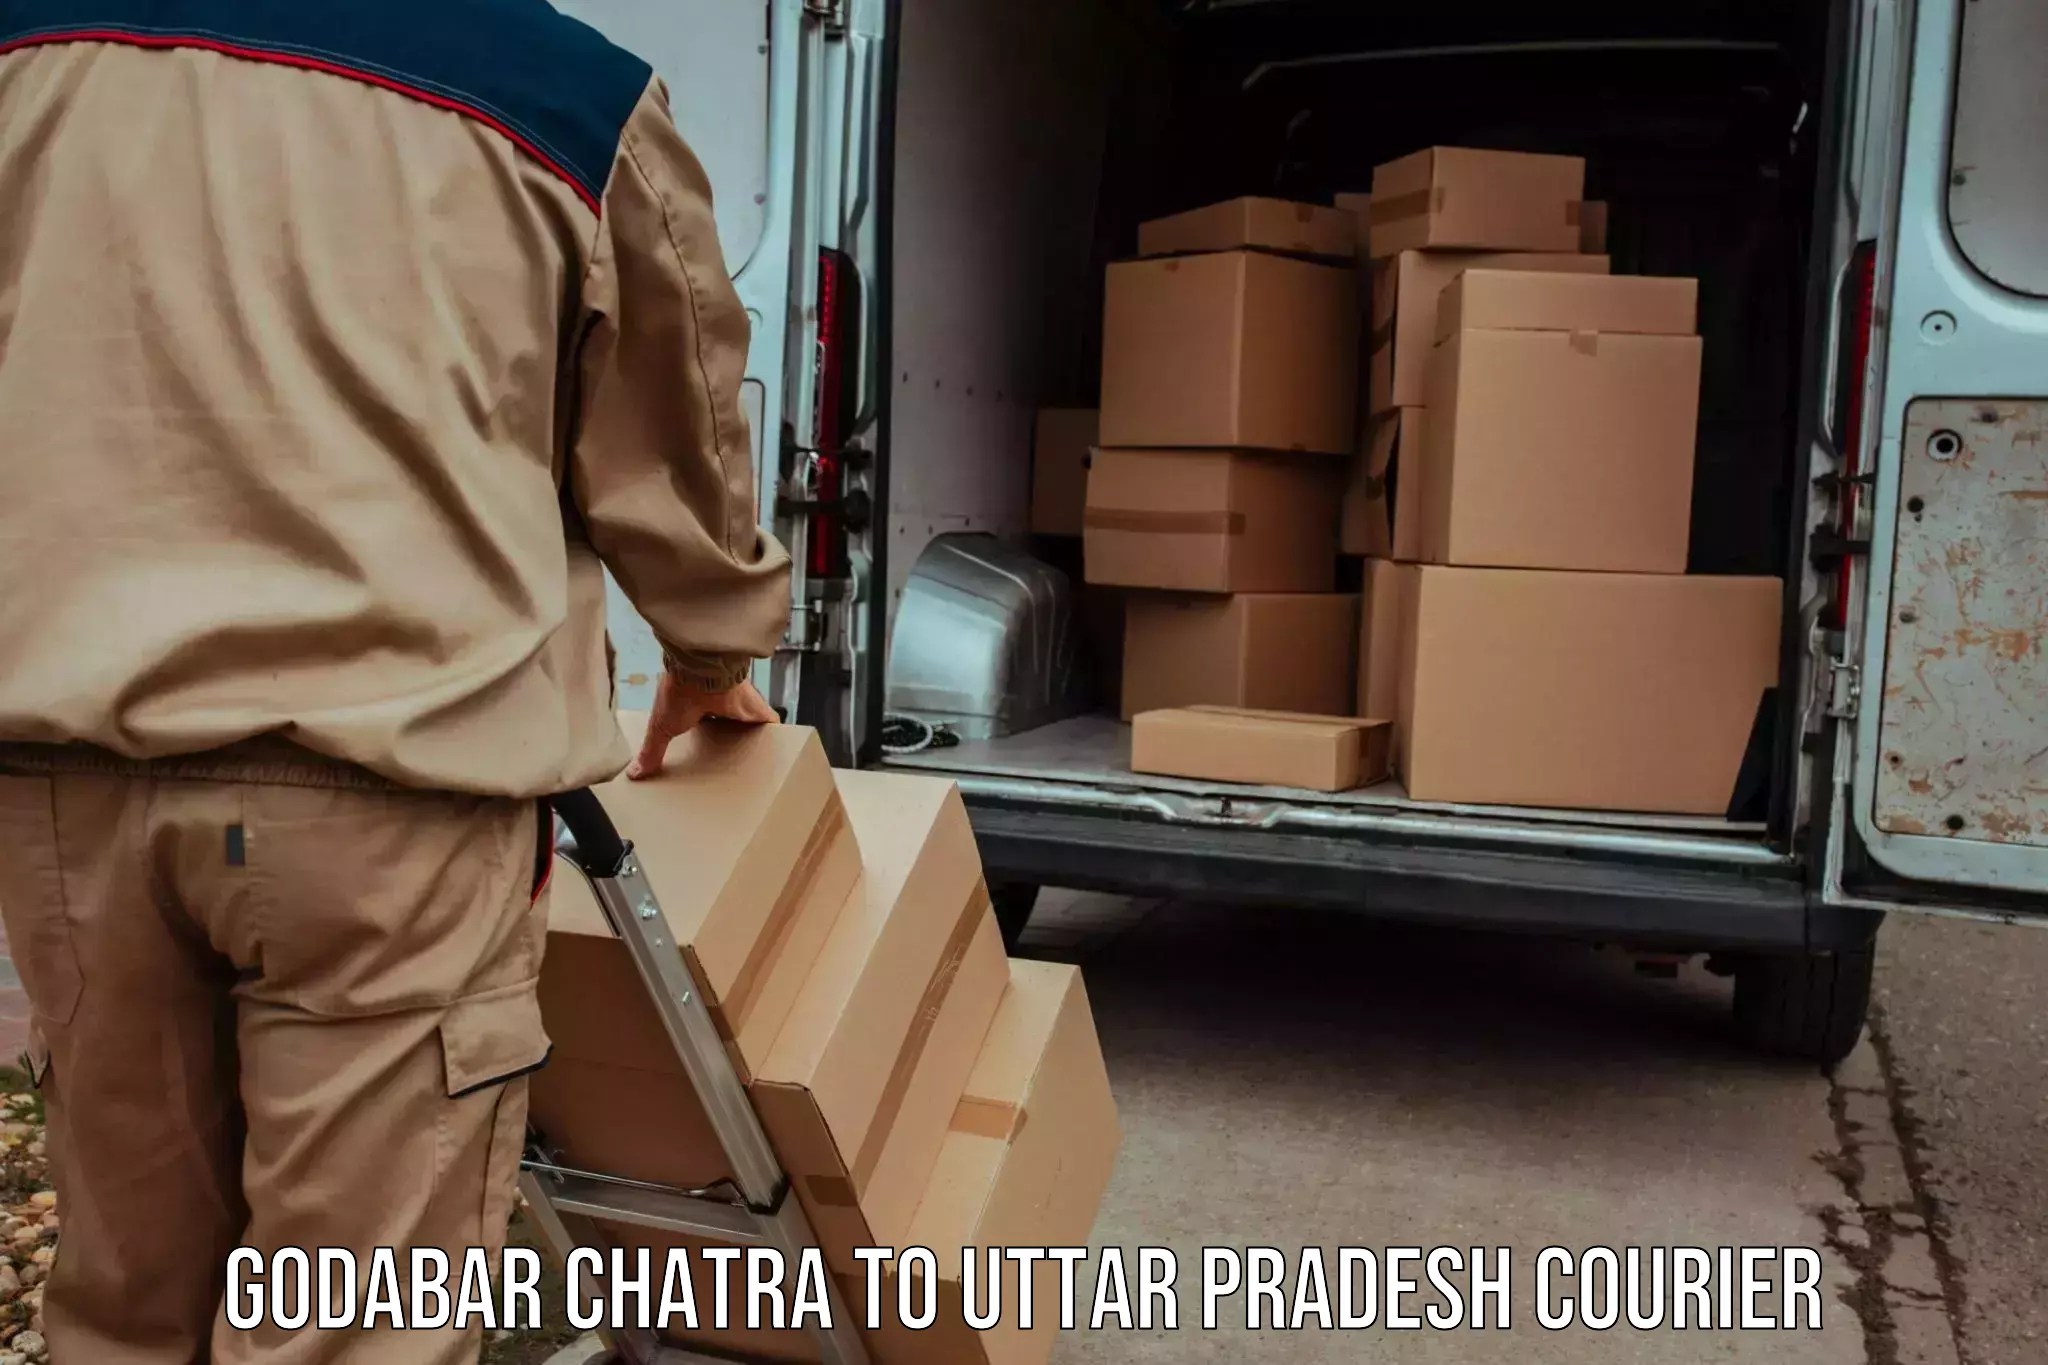 Multi-carrier shipping Godabar Chatra to Konch